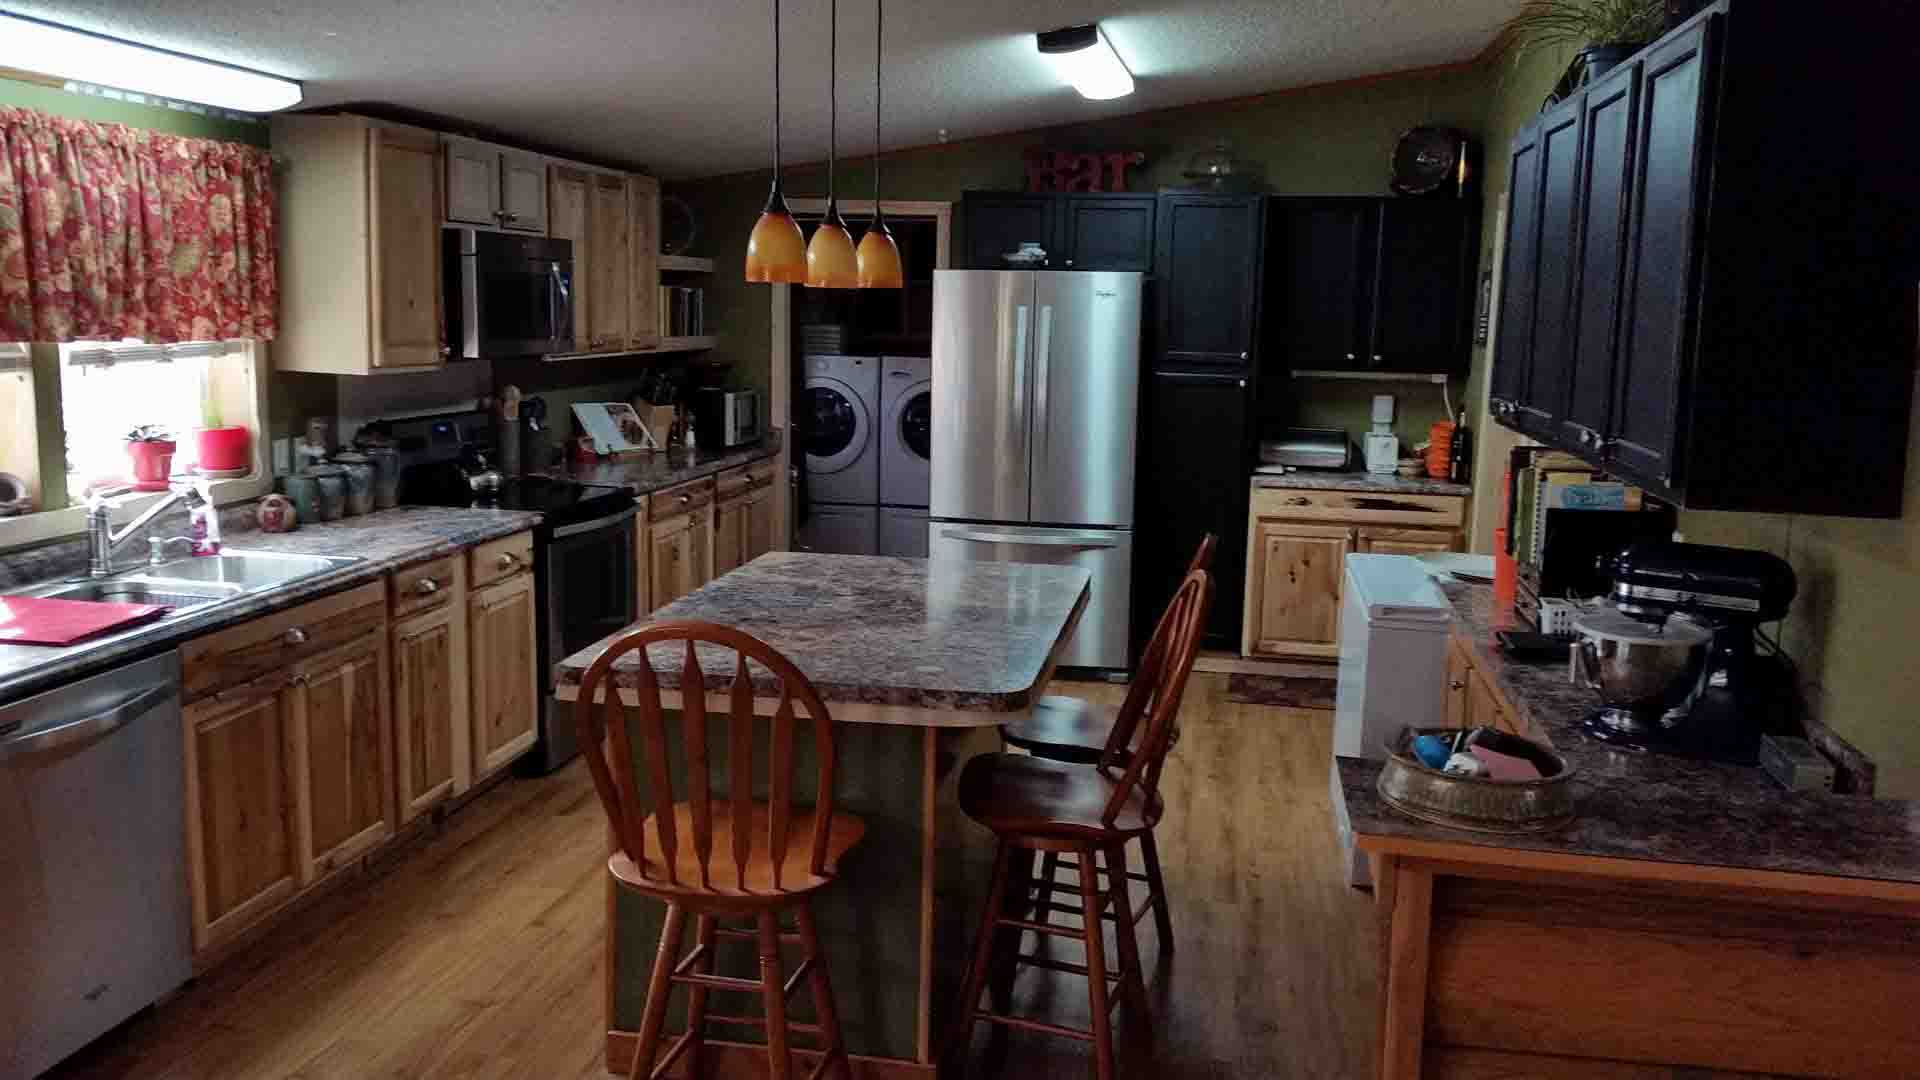 Kitchen With Stone Counter Tops And Black Cabinets On One Side And Wood Cabinets On The Other.